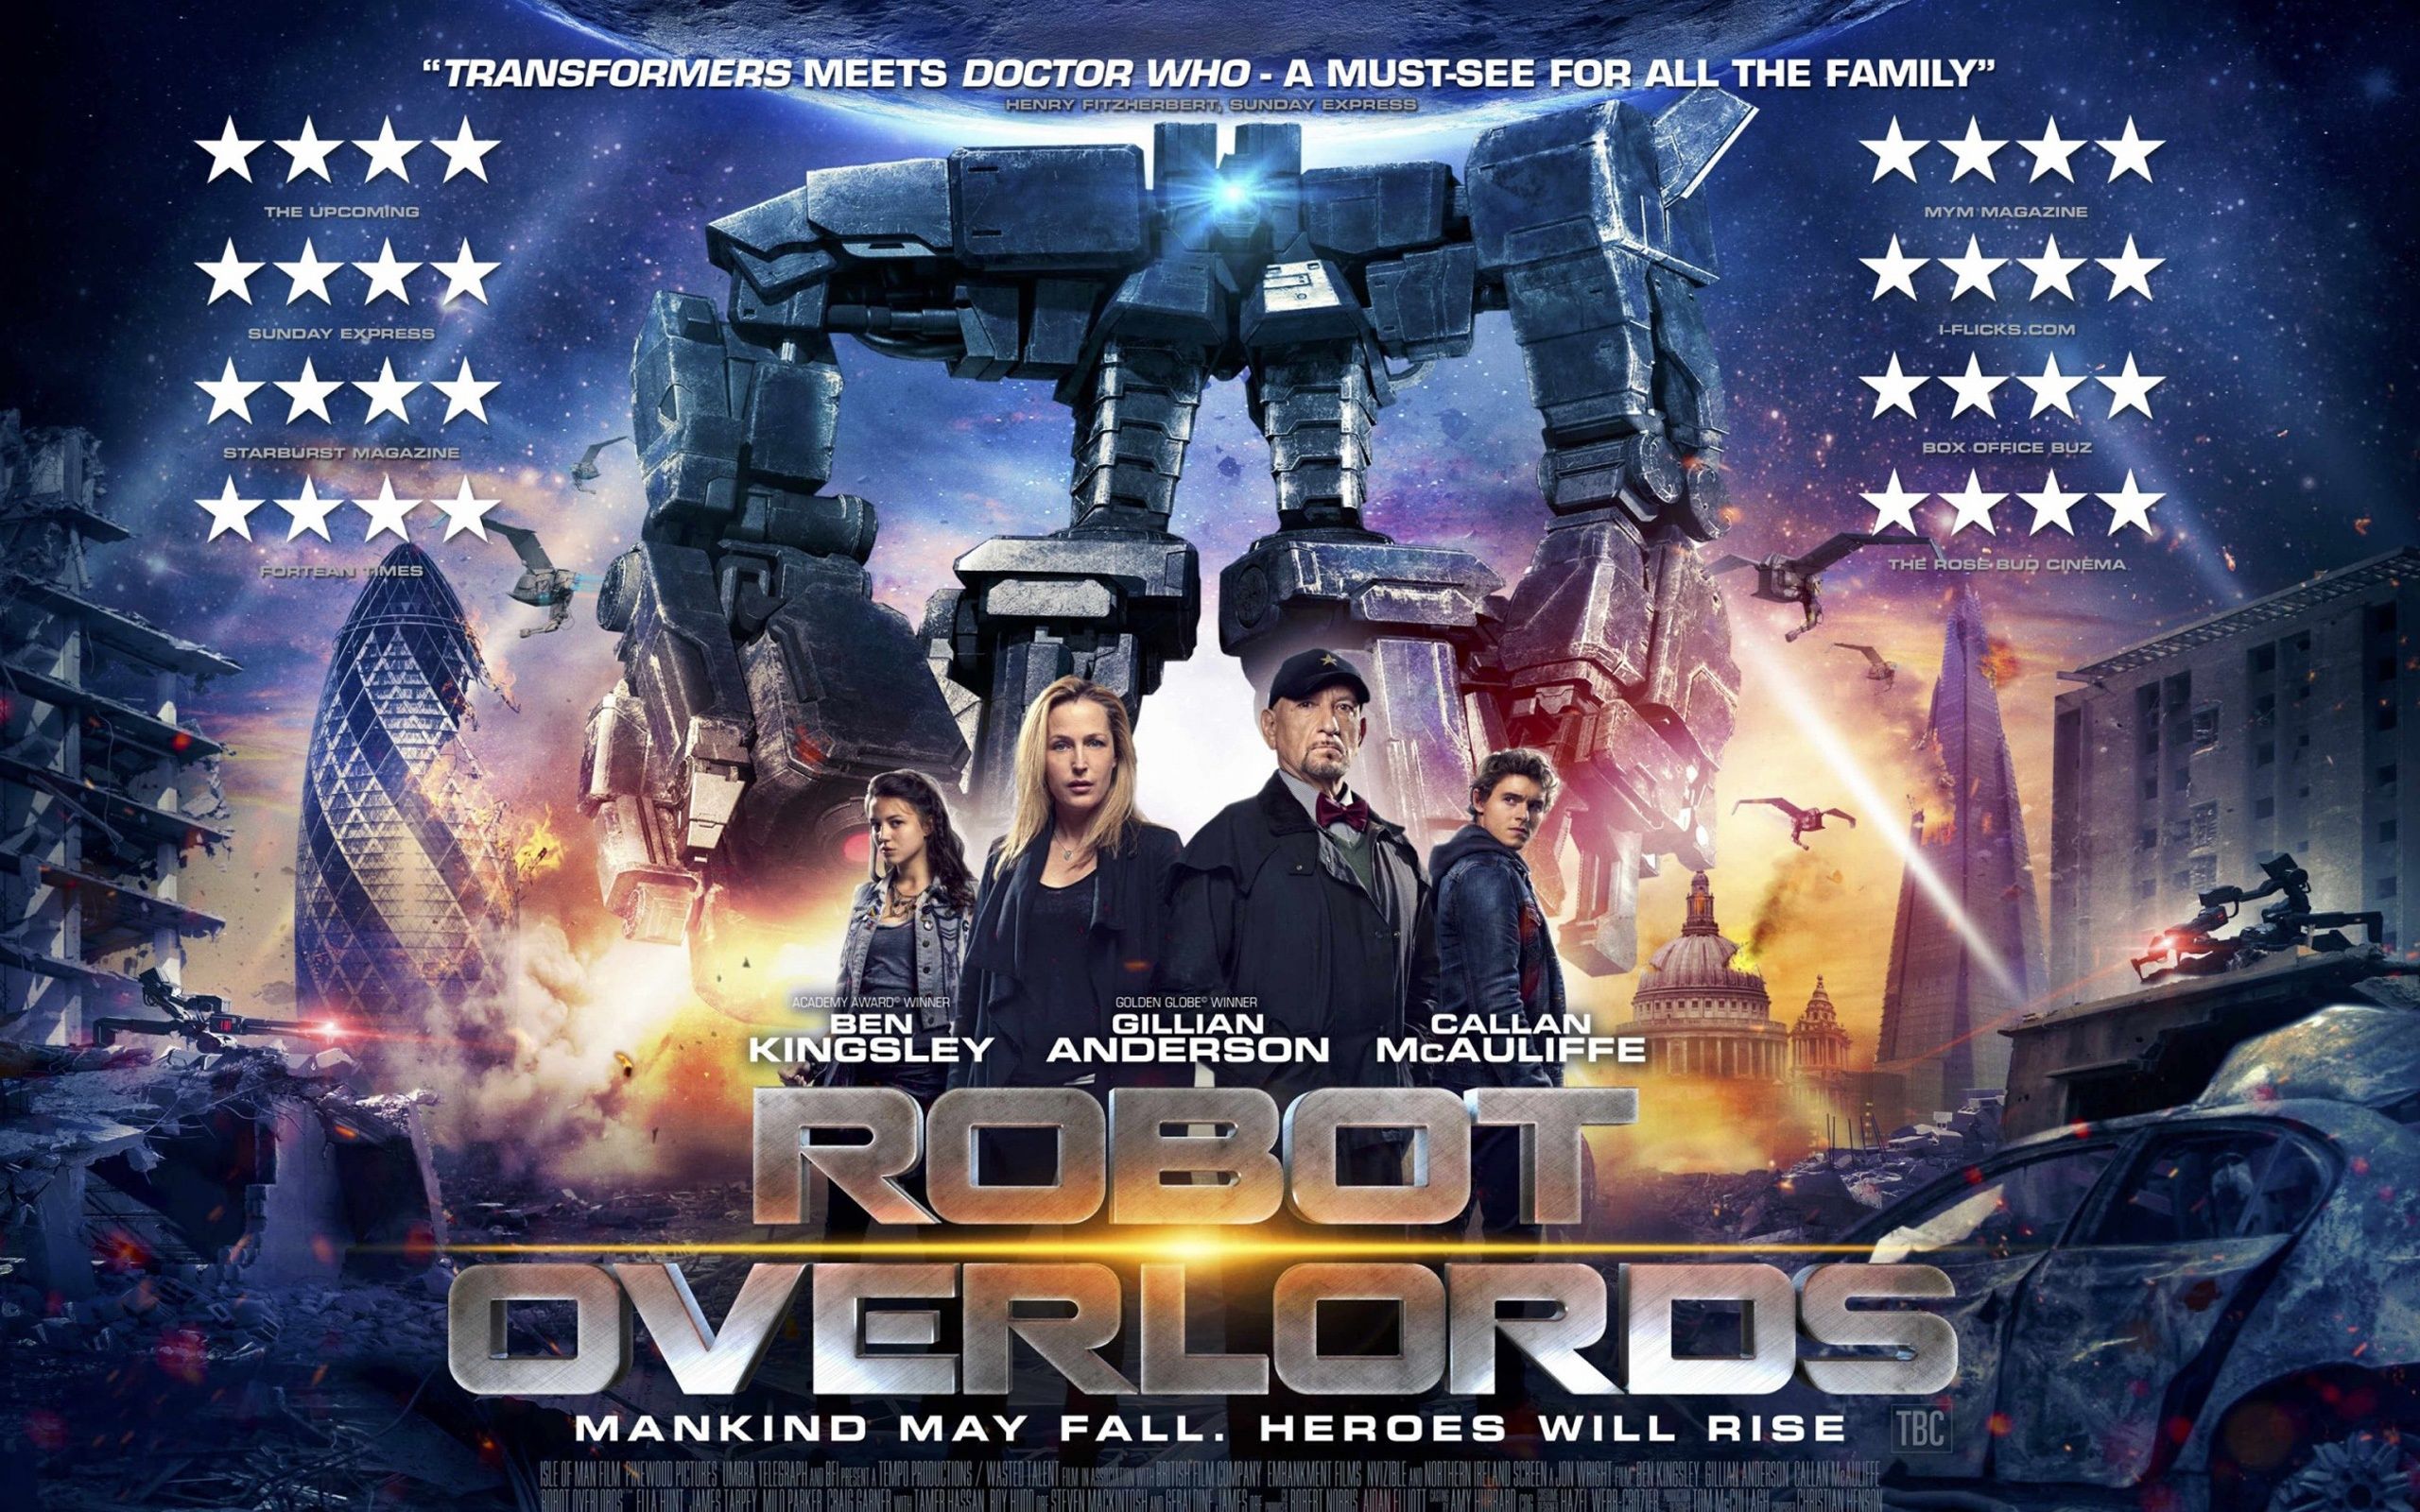 Robot Overlords Movie Wallpaper in jpg format for free download